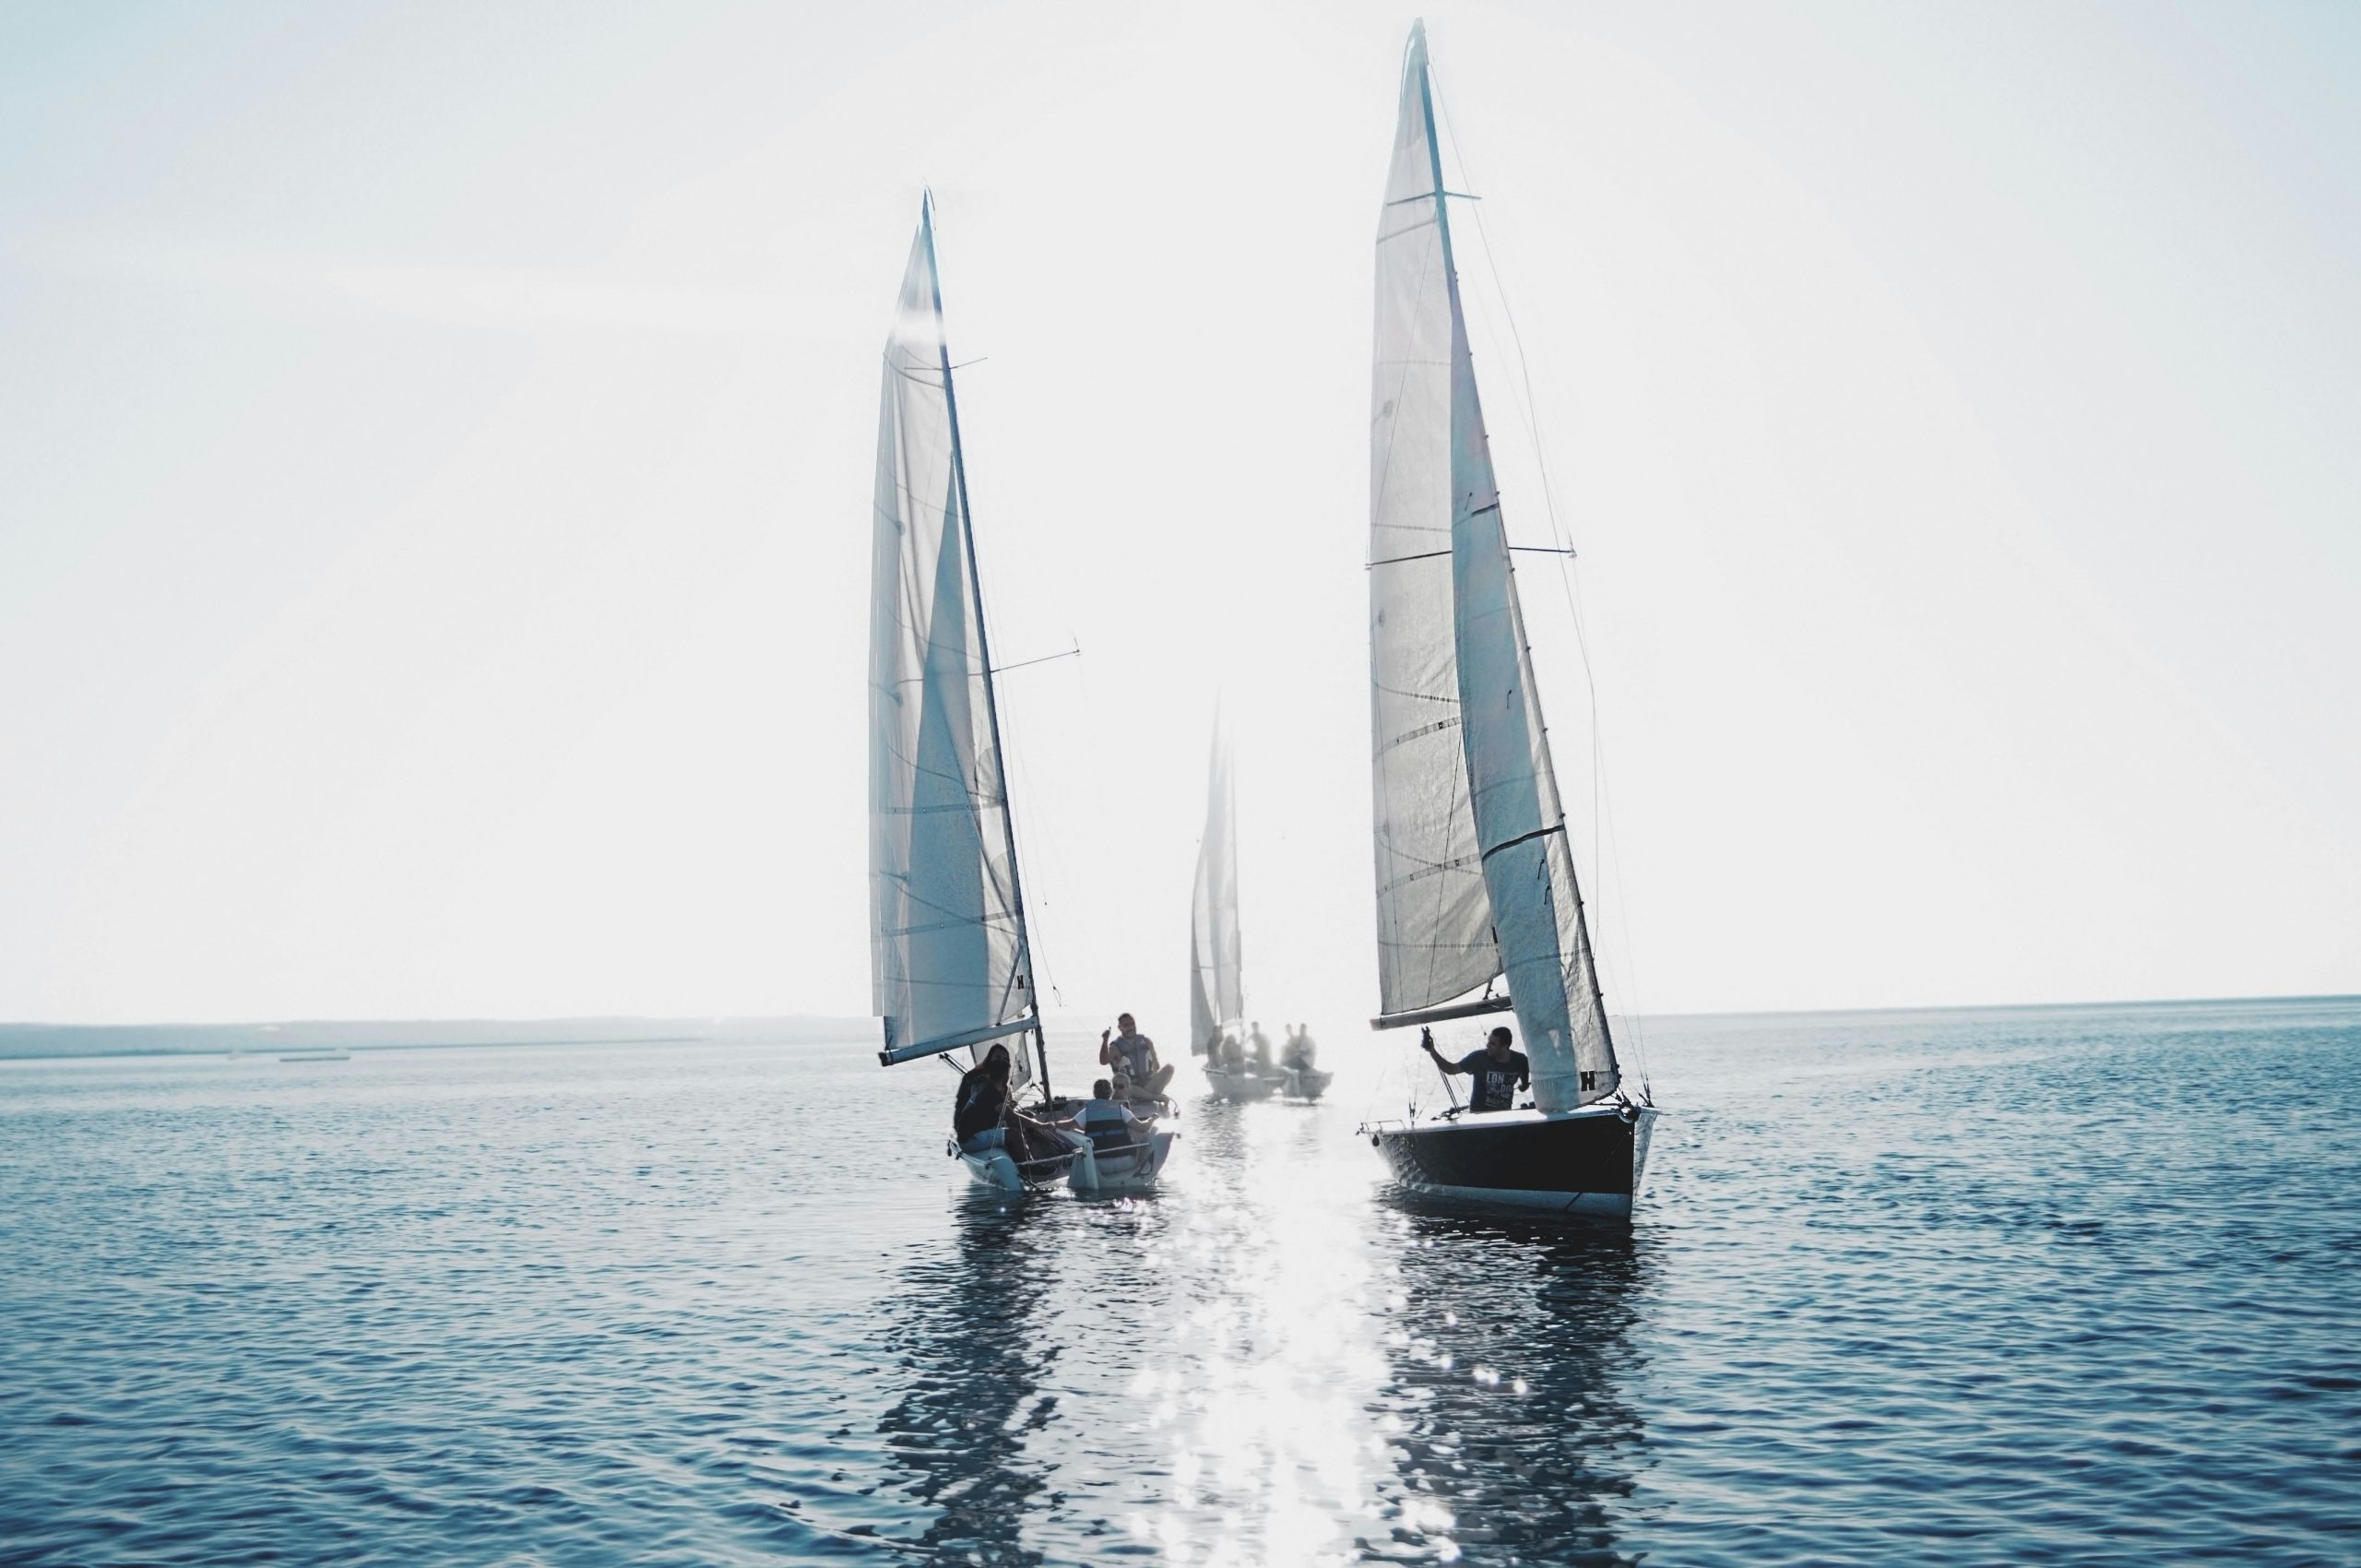 discover the joy of sailing with our expert guides and experience the freedom of the open sea. join us on a memorable journey to explore the beauty of the ocean.